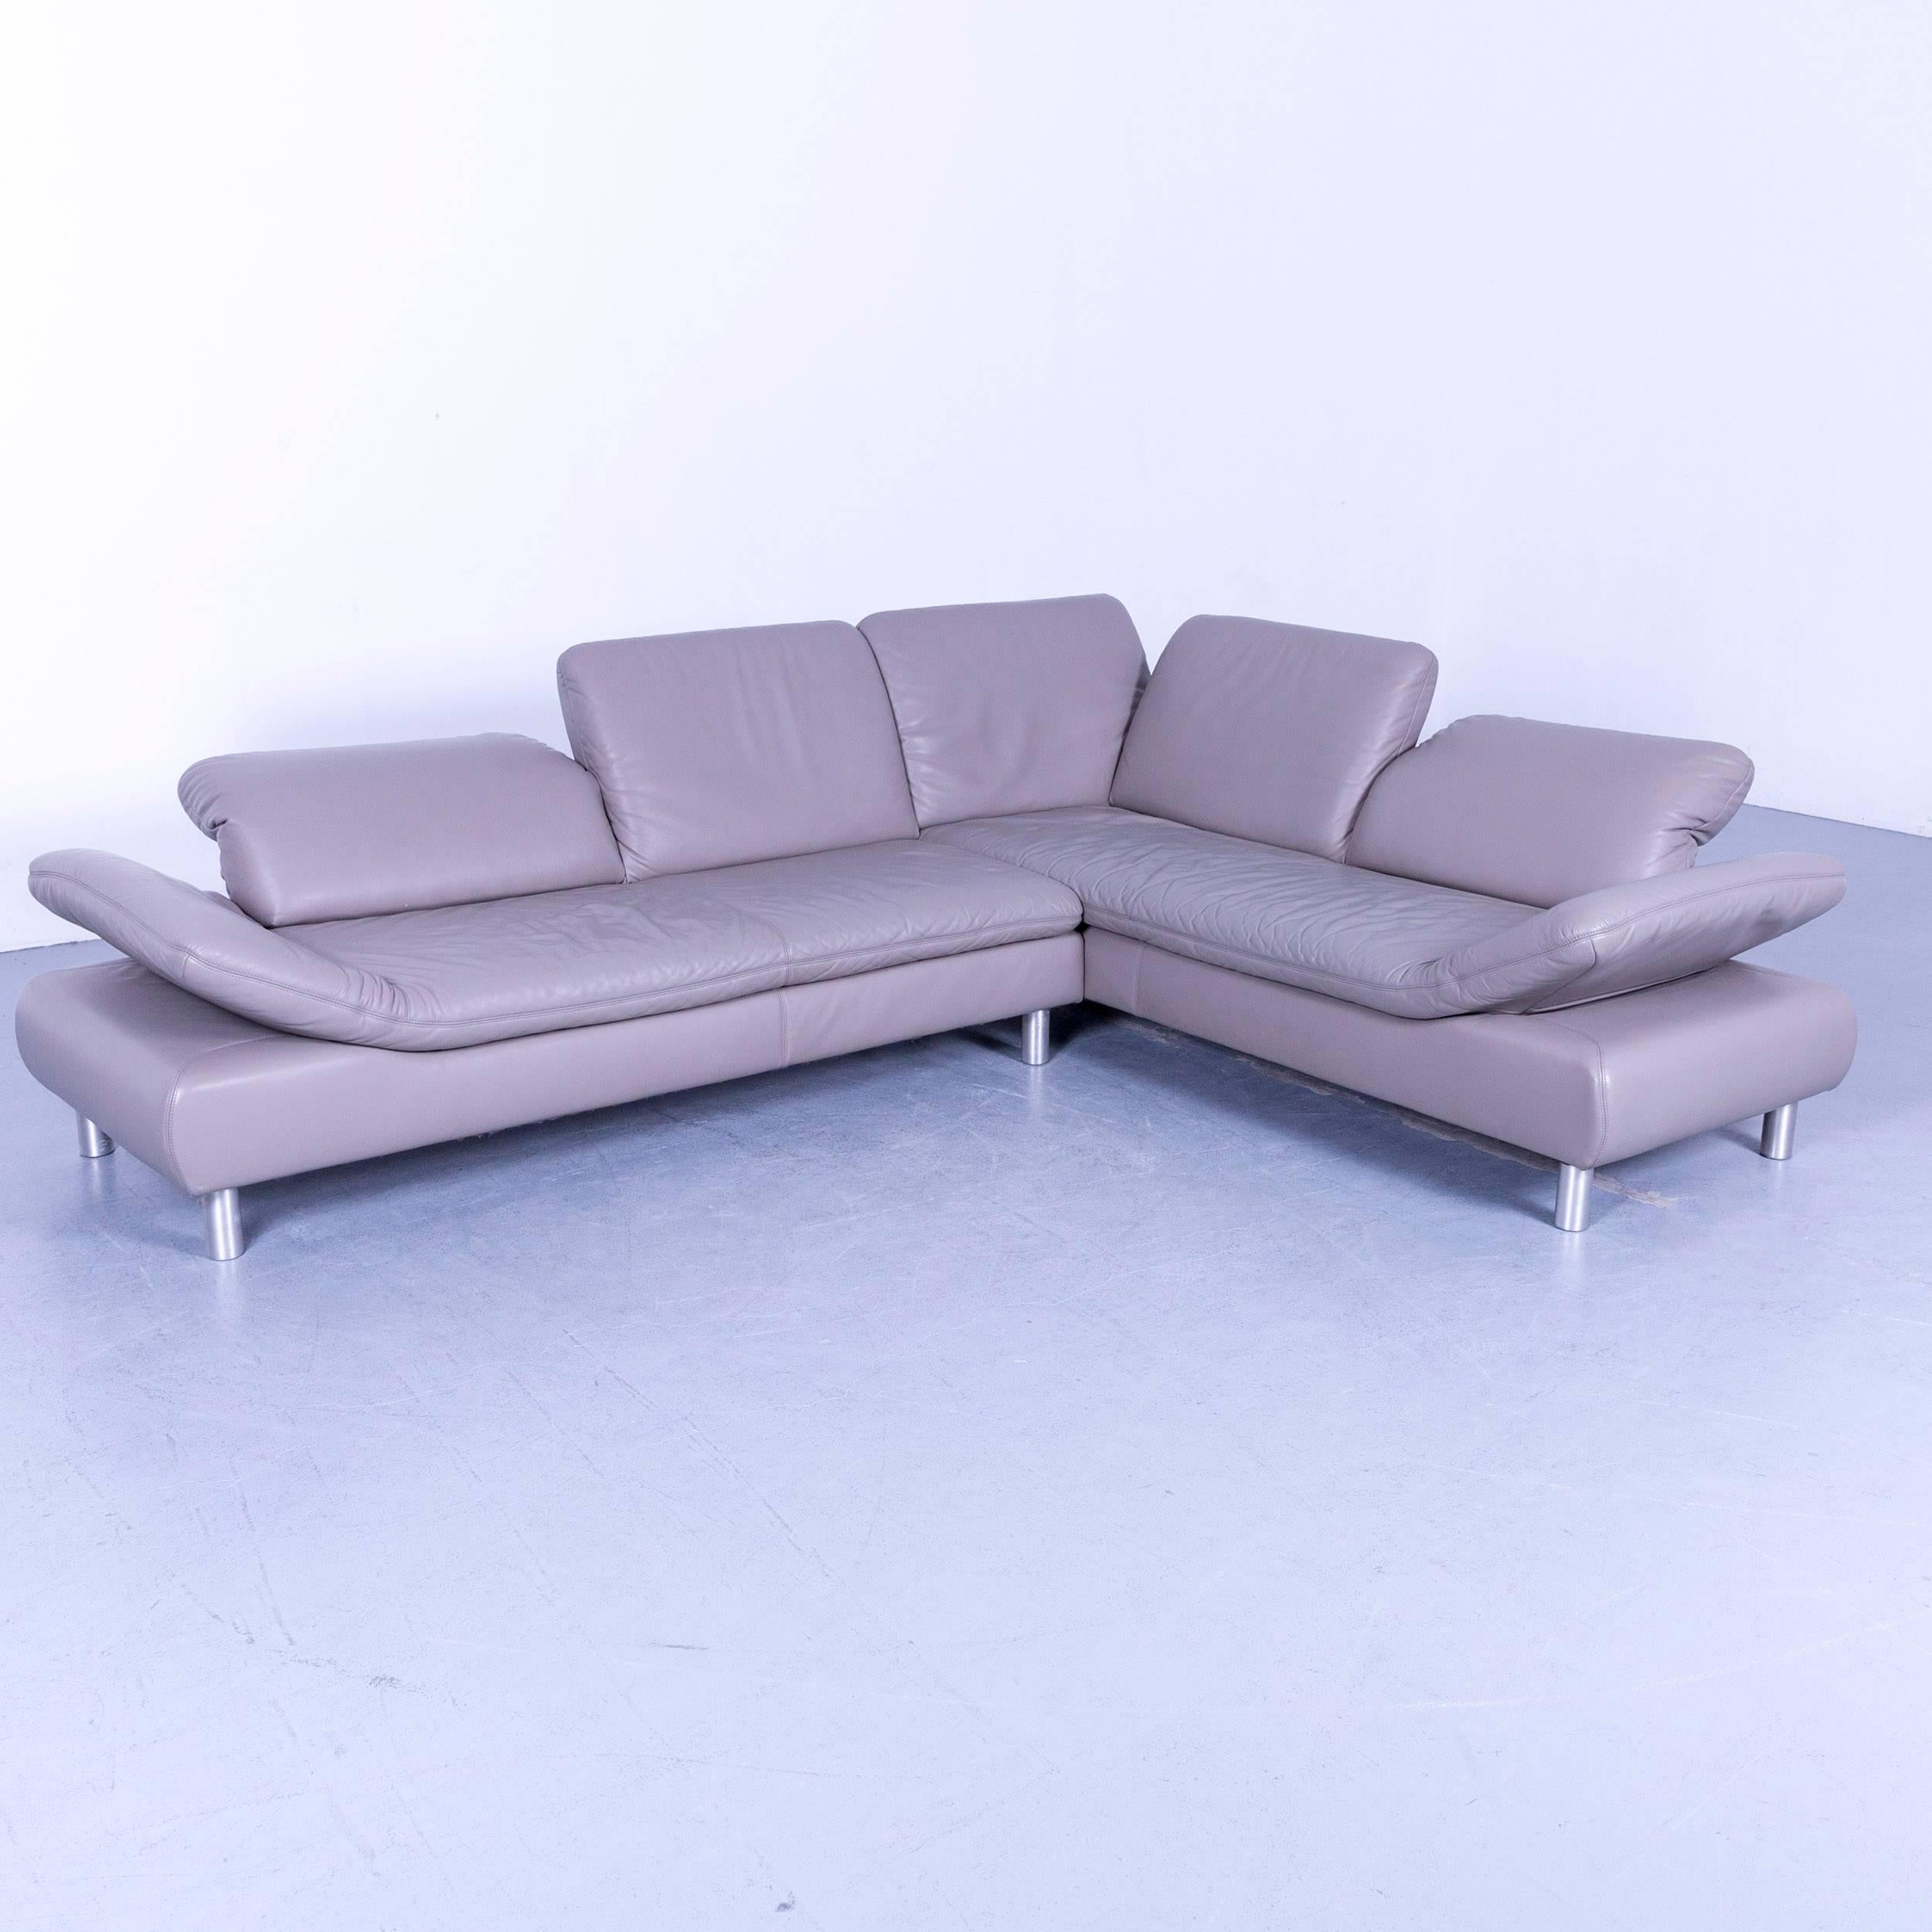 Koinor Rivoli designer corner sofa blue leather function modern in a minimalistic and modern design, with convenient functions, made for pure comfort and flexibility.